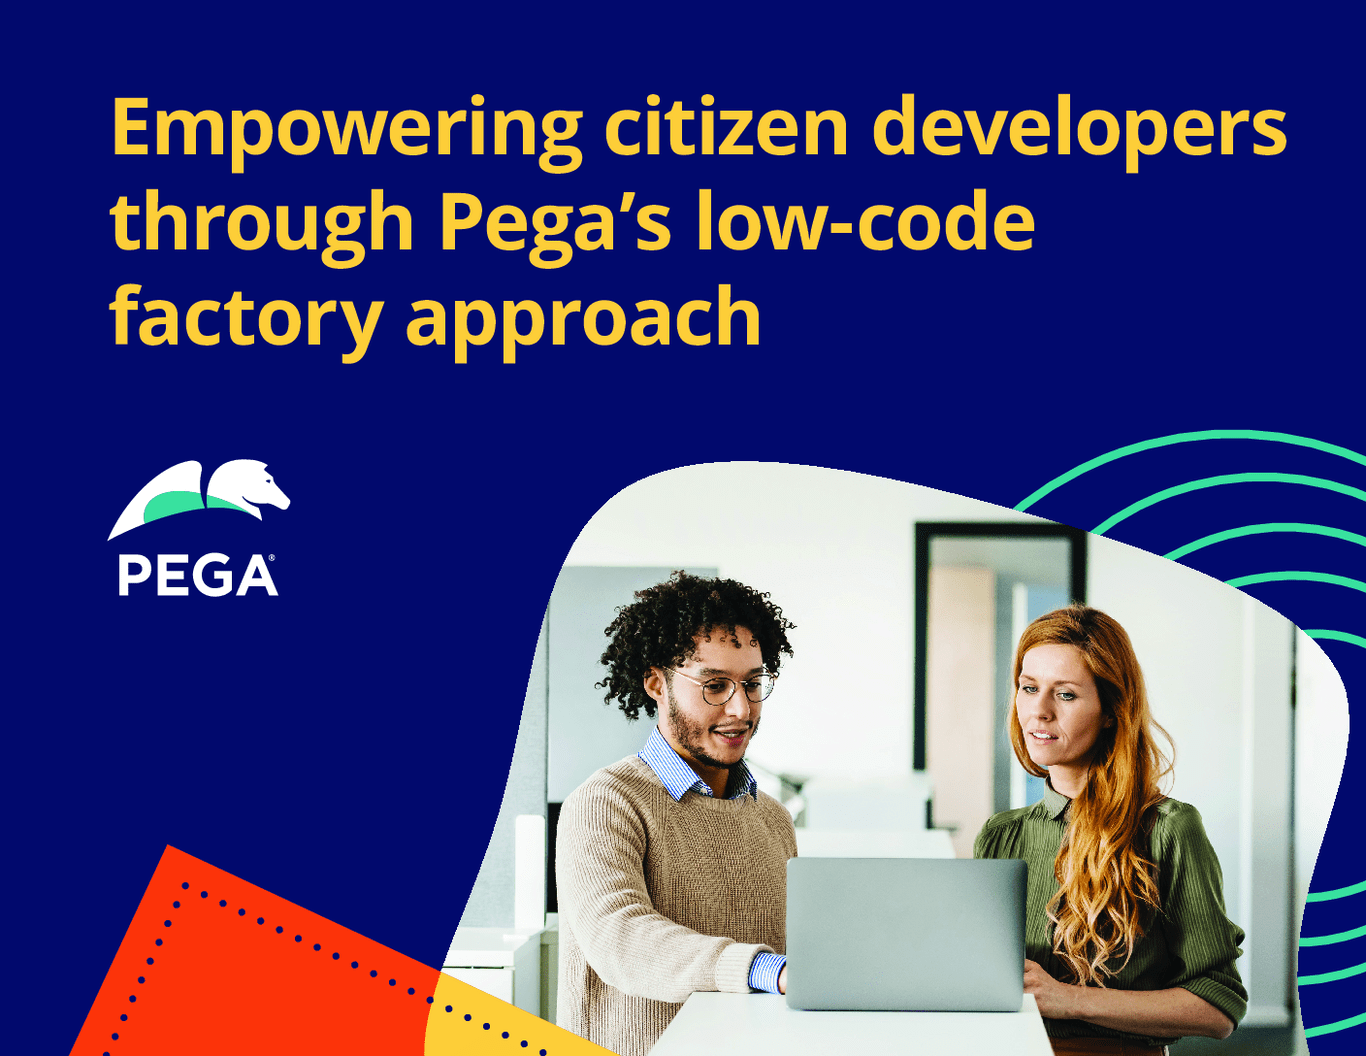 Build value fast with a low-code factory approach to citizen development